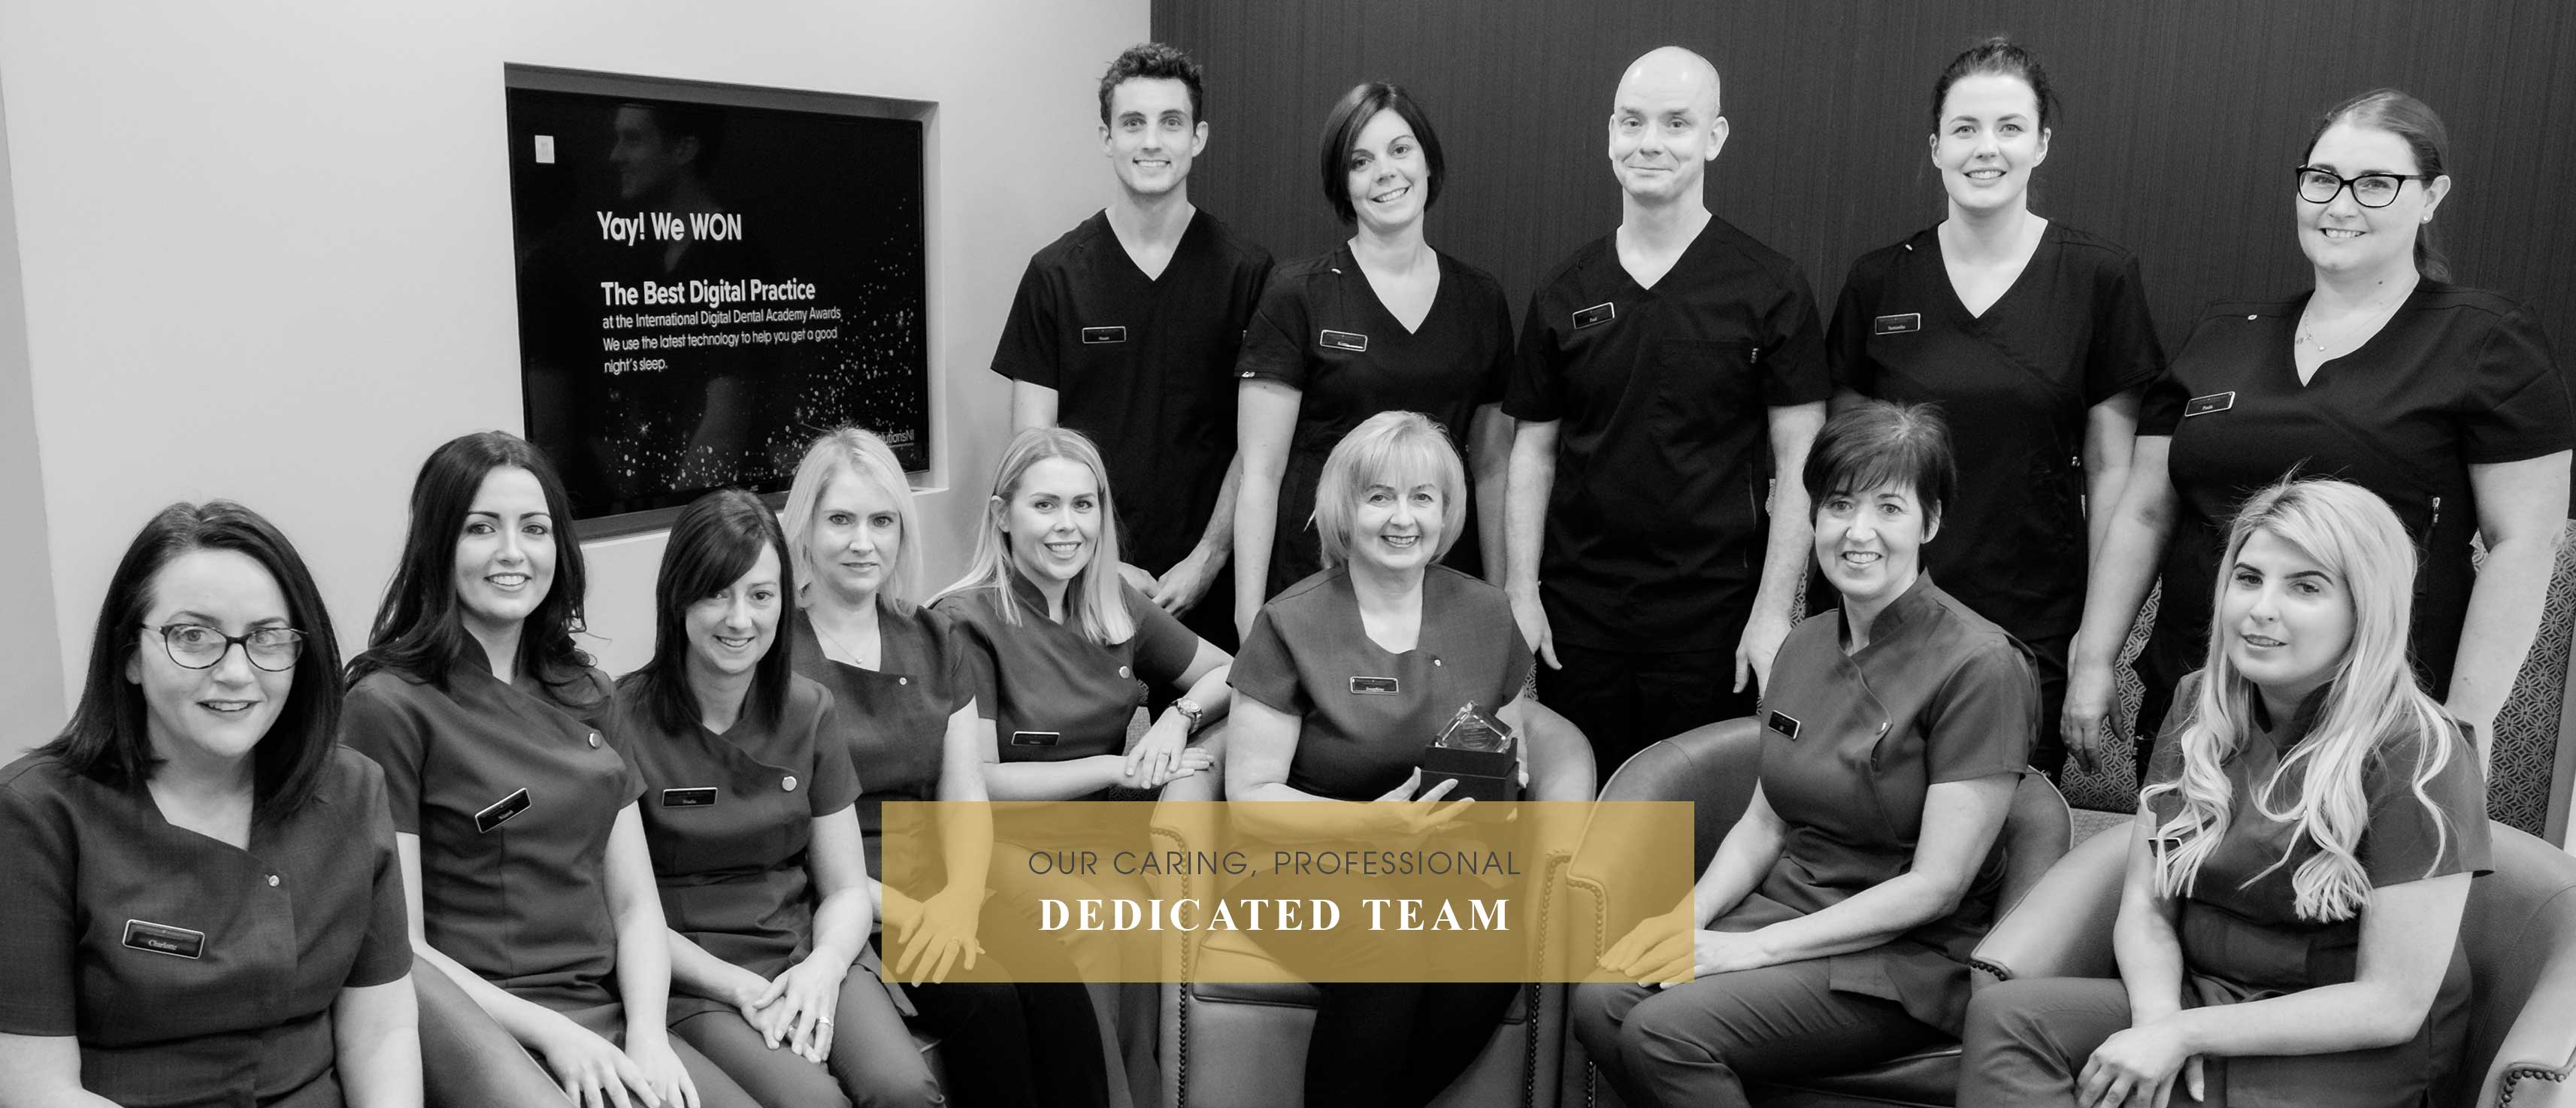 Our Caring professional, dedicated team